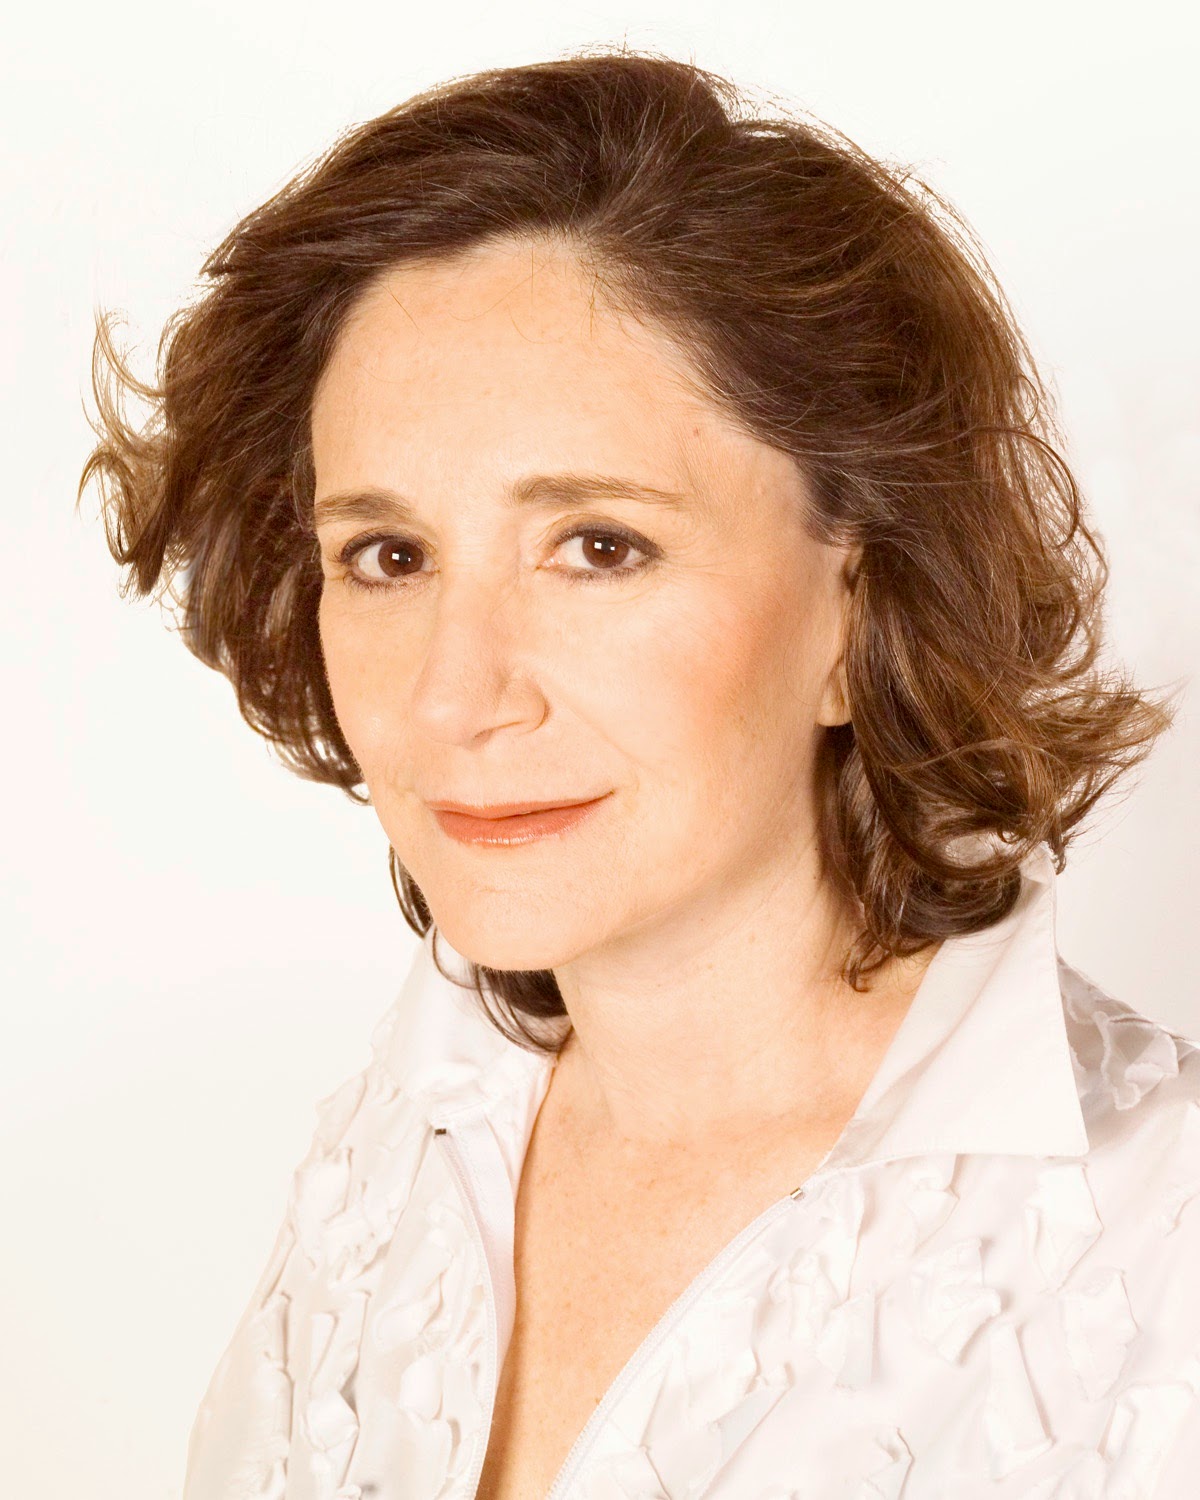 About the Author, Sherry Turkle